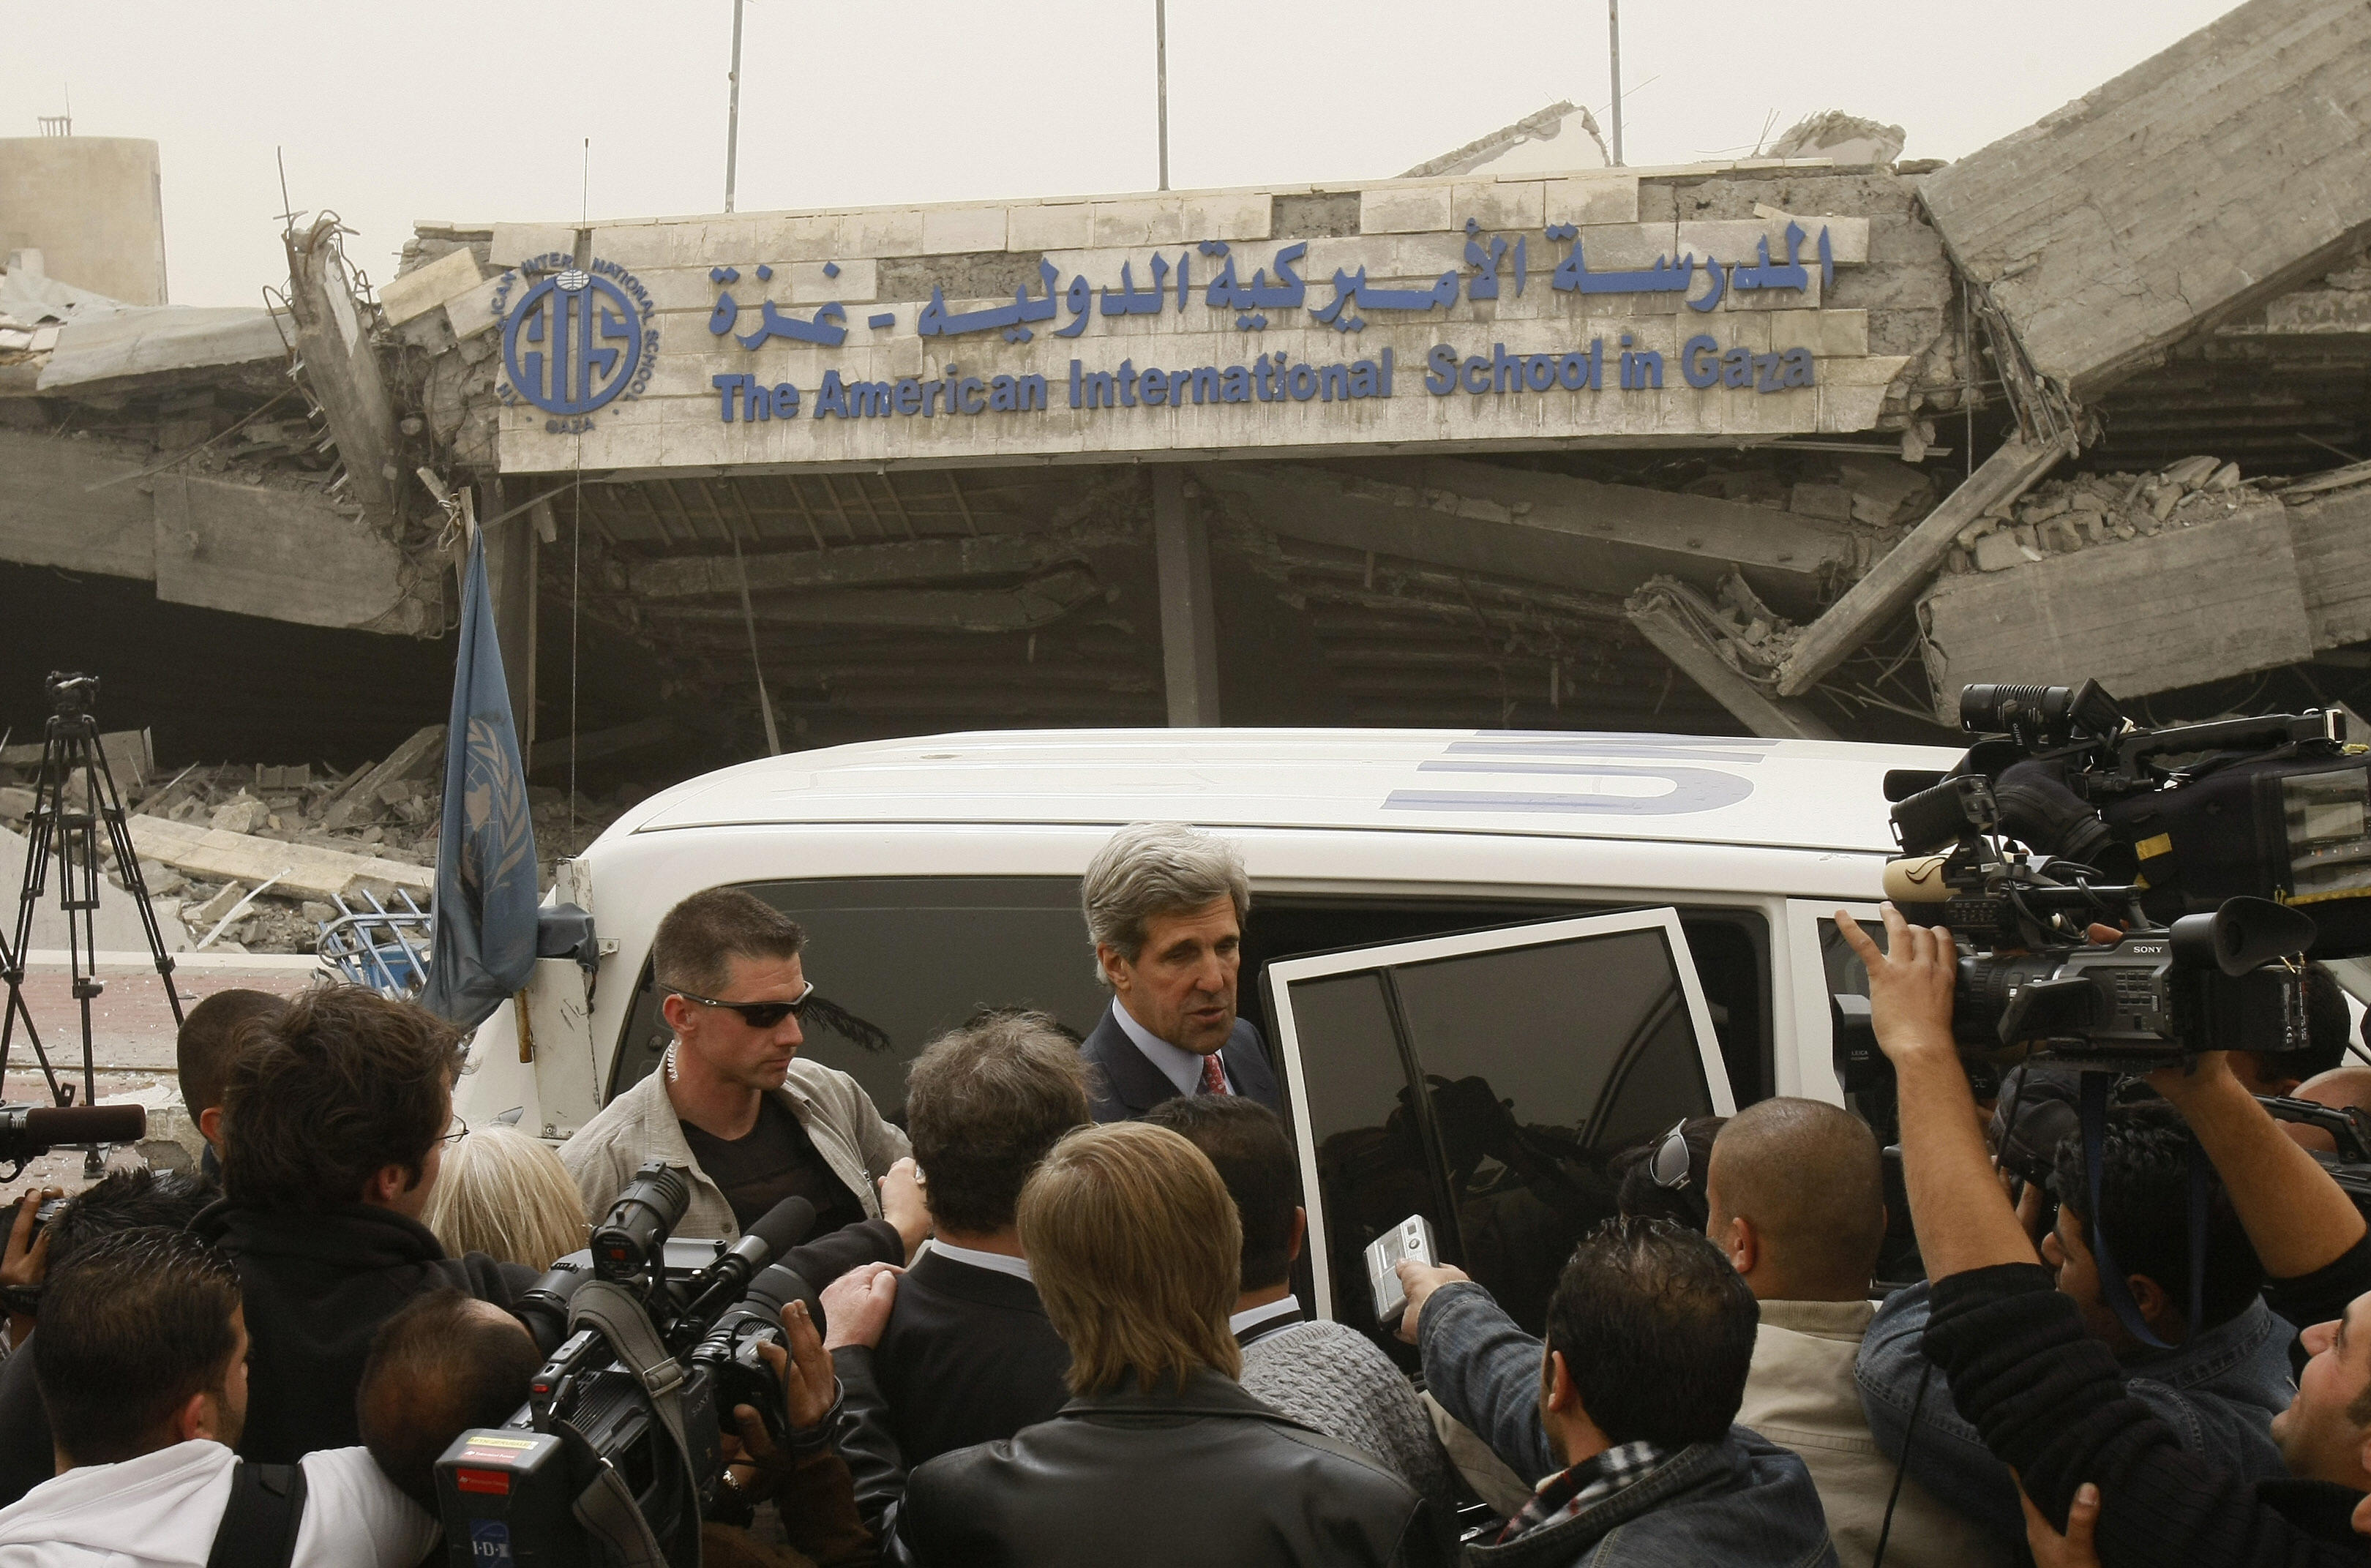 MOHAMMED ABED/AFP/Getty Images.Sen. John Kerry, center, visits the American International School, destroyed by the Israeli attacks on Gaza.